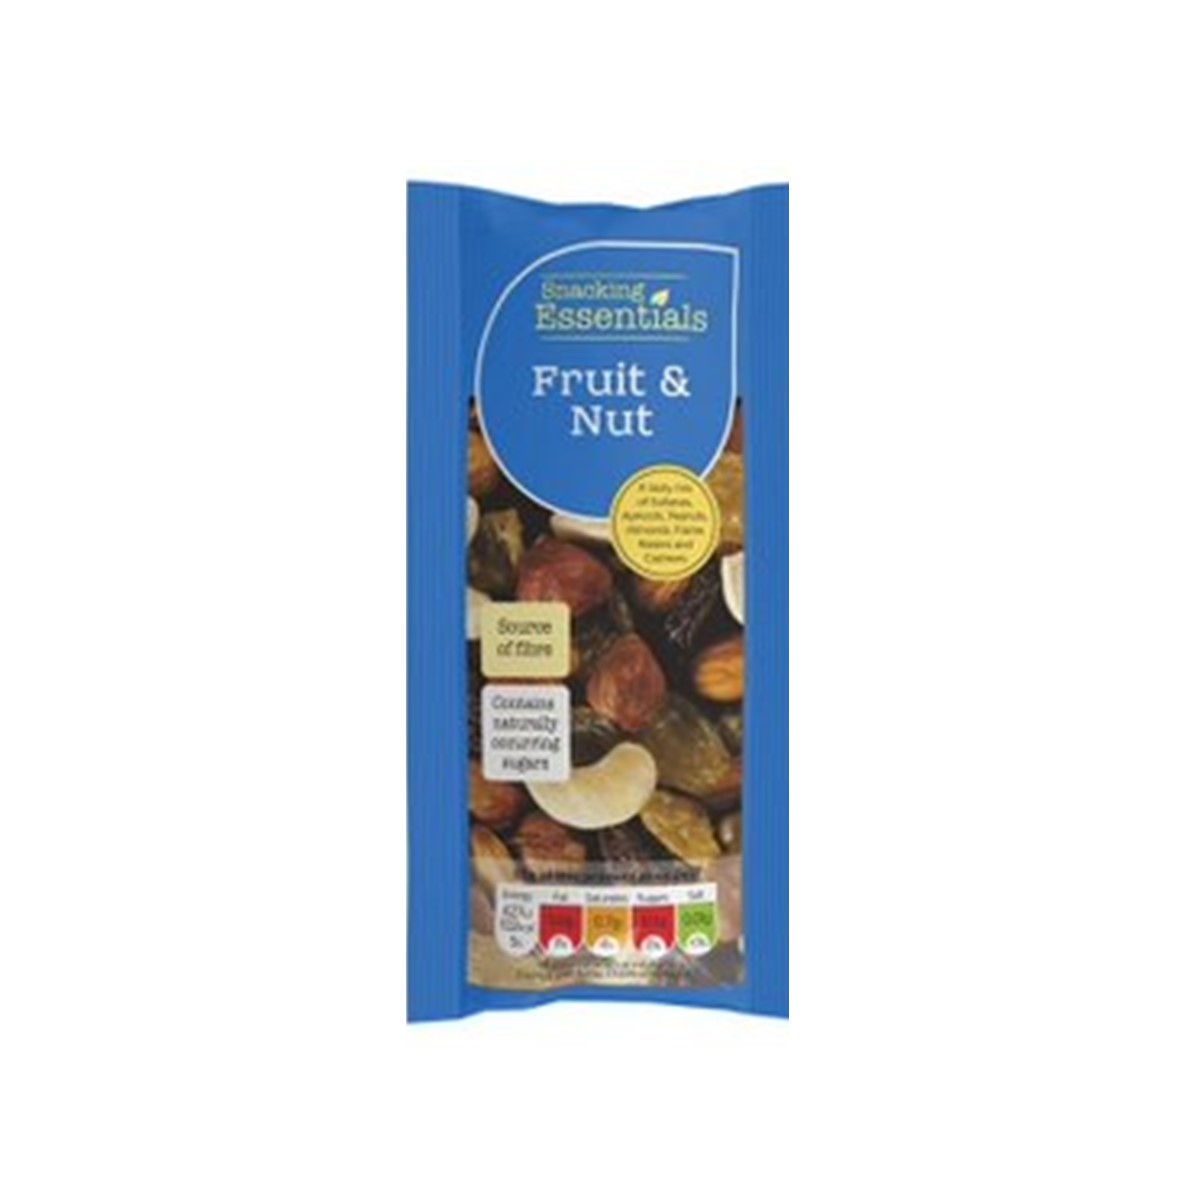 Snacking Essentials Fruit & Nut Mix - 16x40g packets